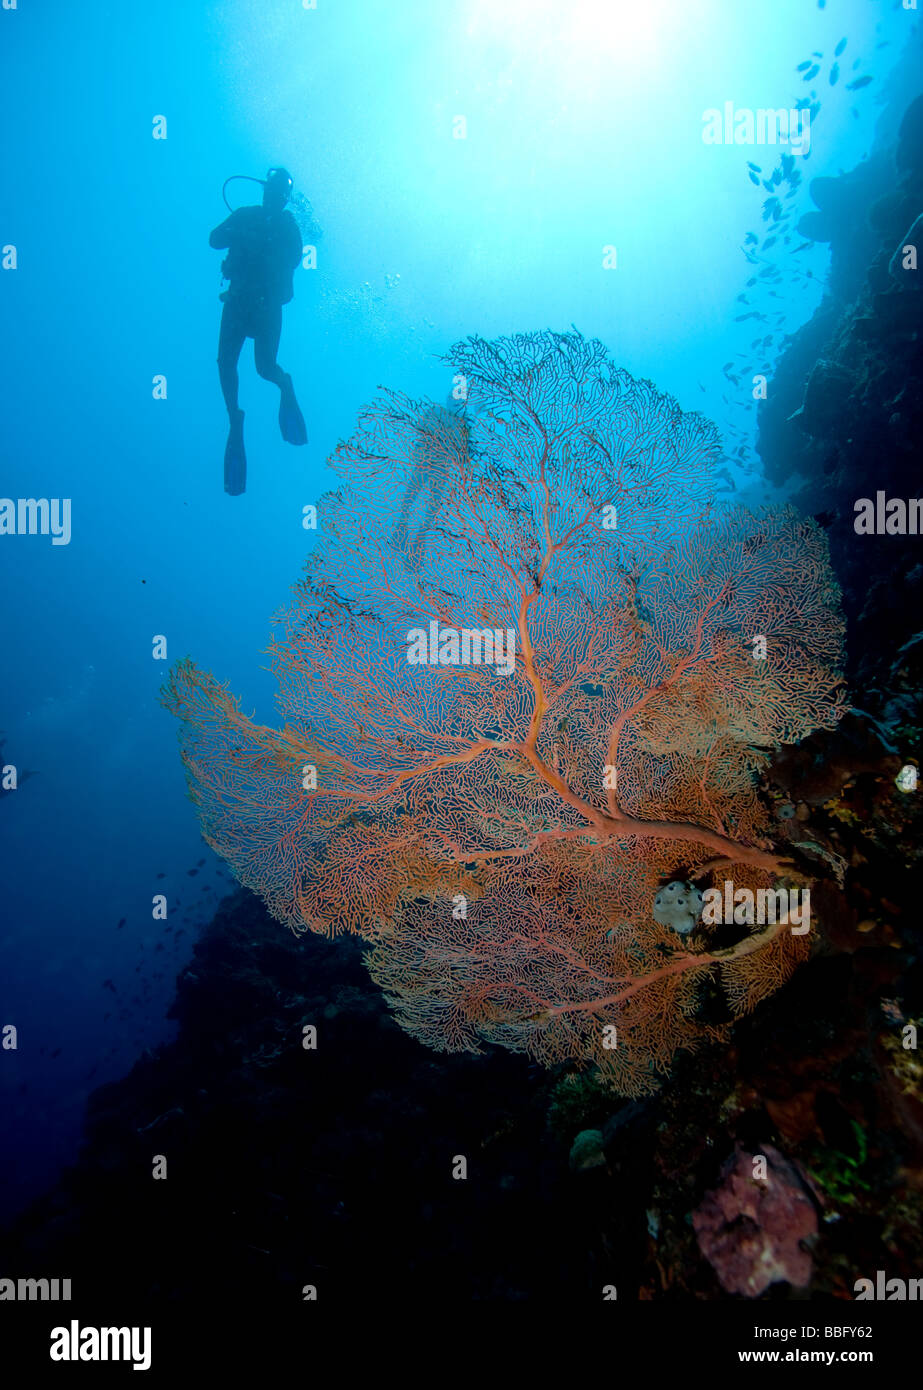 Diver silhouette behind sea fan. Stock Photo